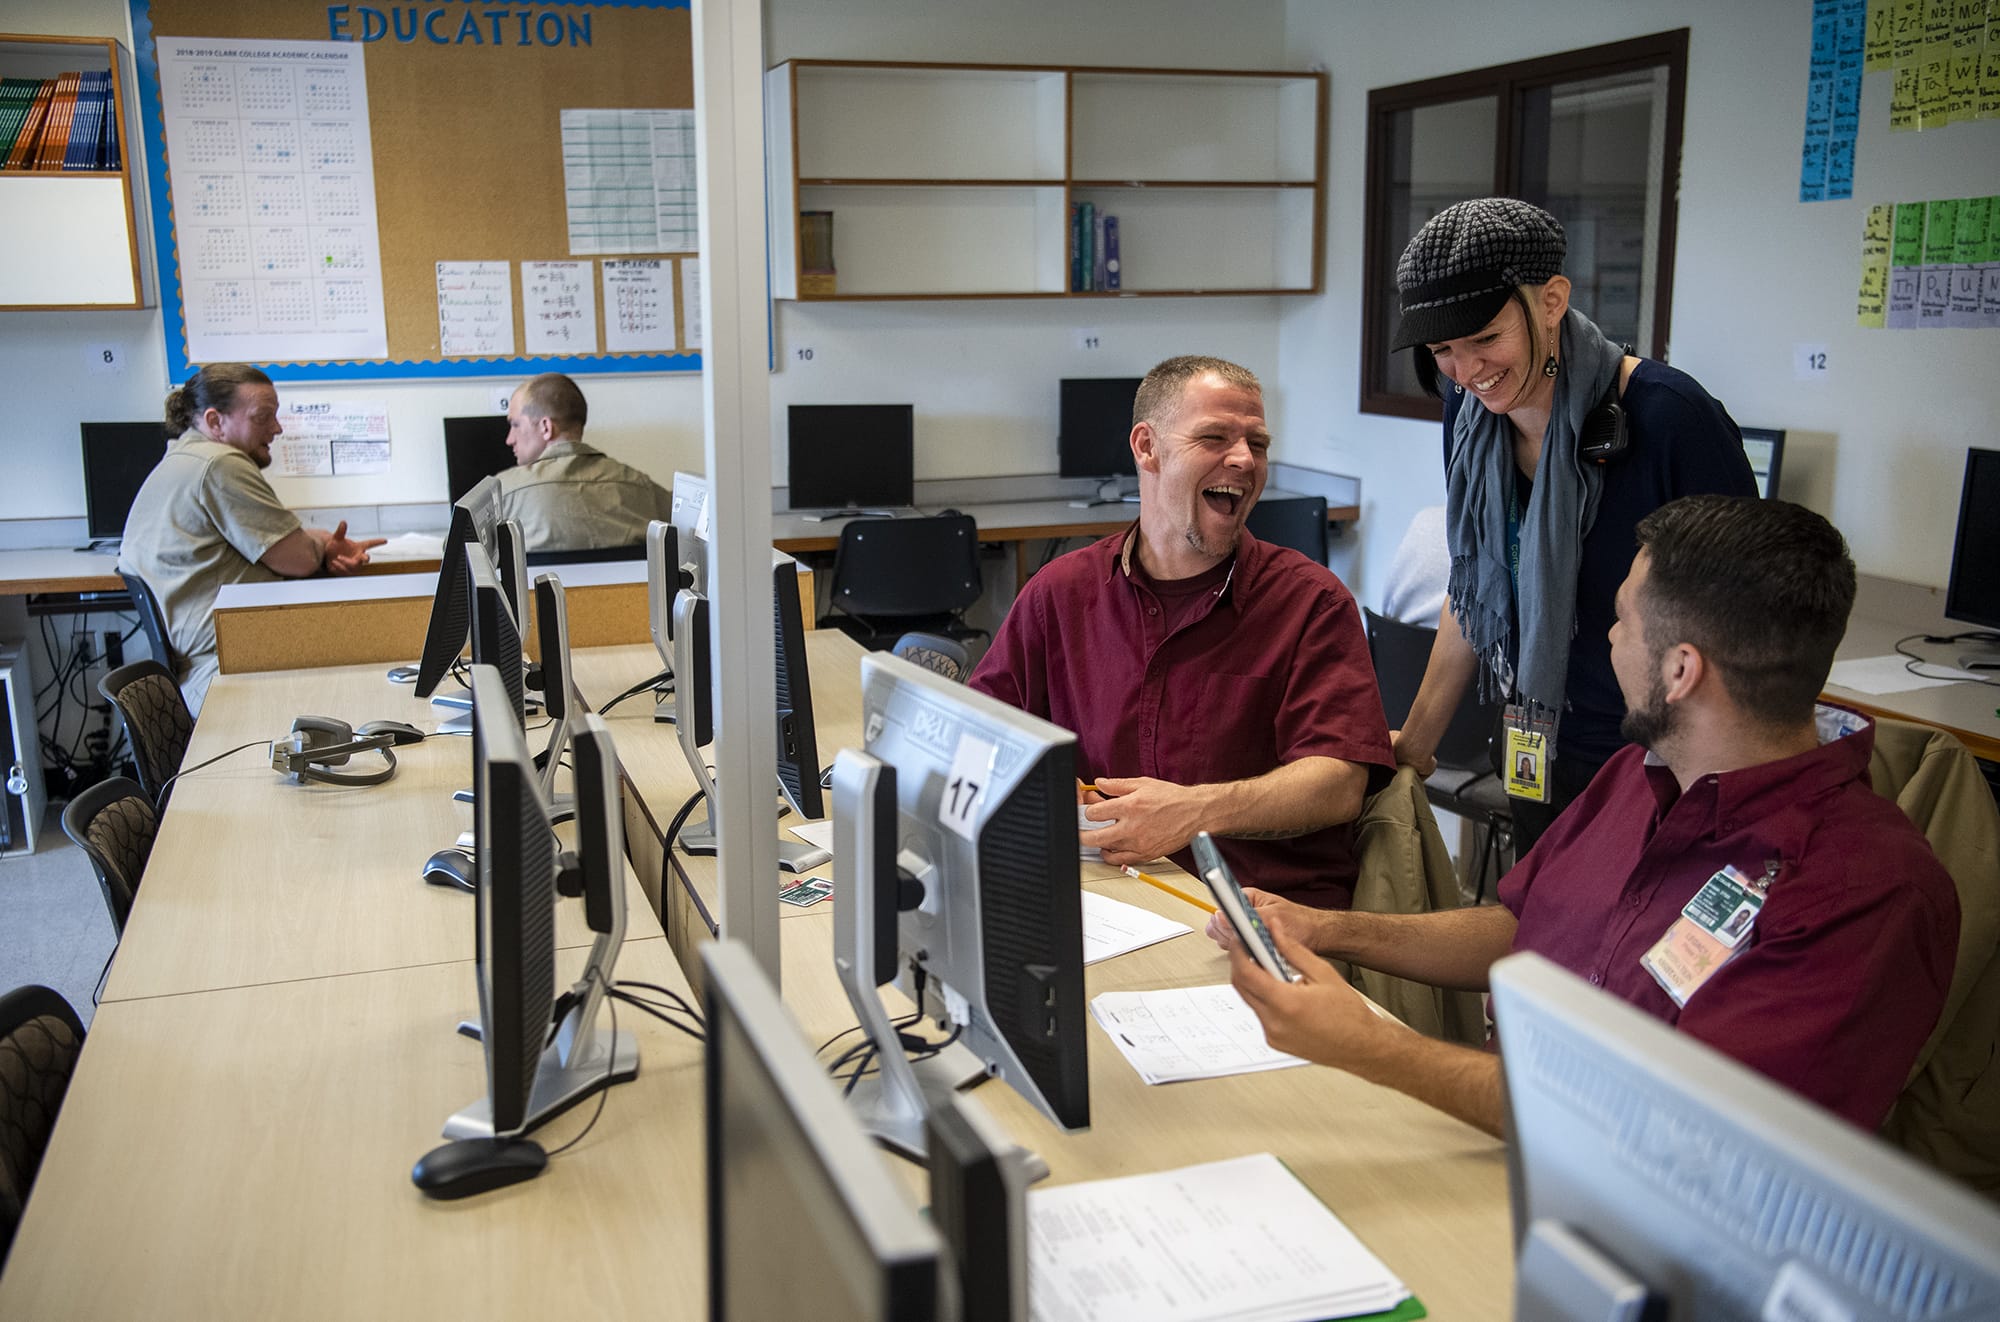 Howard Seaworth, left, and Jakkob McCallin, right, chat with their instructor Lauren Zavrel during her GED class at Larch Corrections Center in Yacolt on Tuesday, May 14, 2019. Zavrel recently got LarchÕs   peer-tutor program accreditation from the College Reading and Learning Association. It is the first corrections center in the country with a peer-tutor program accredited by this national organization.